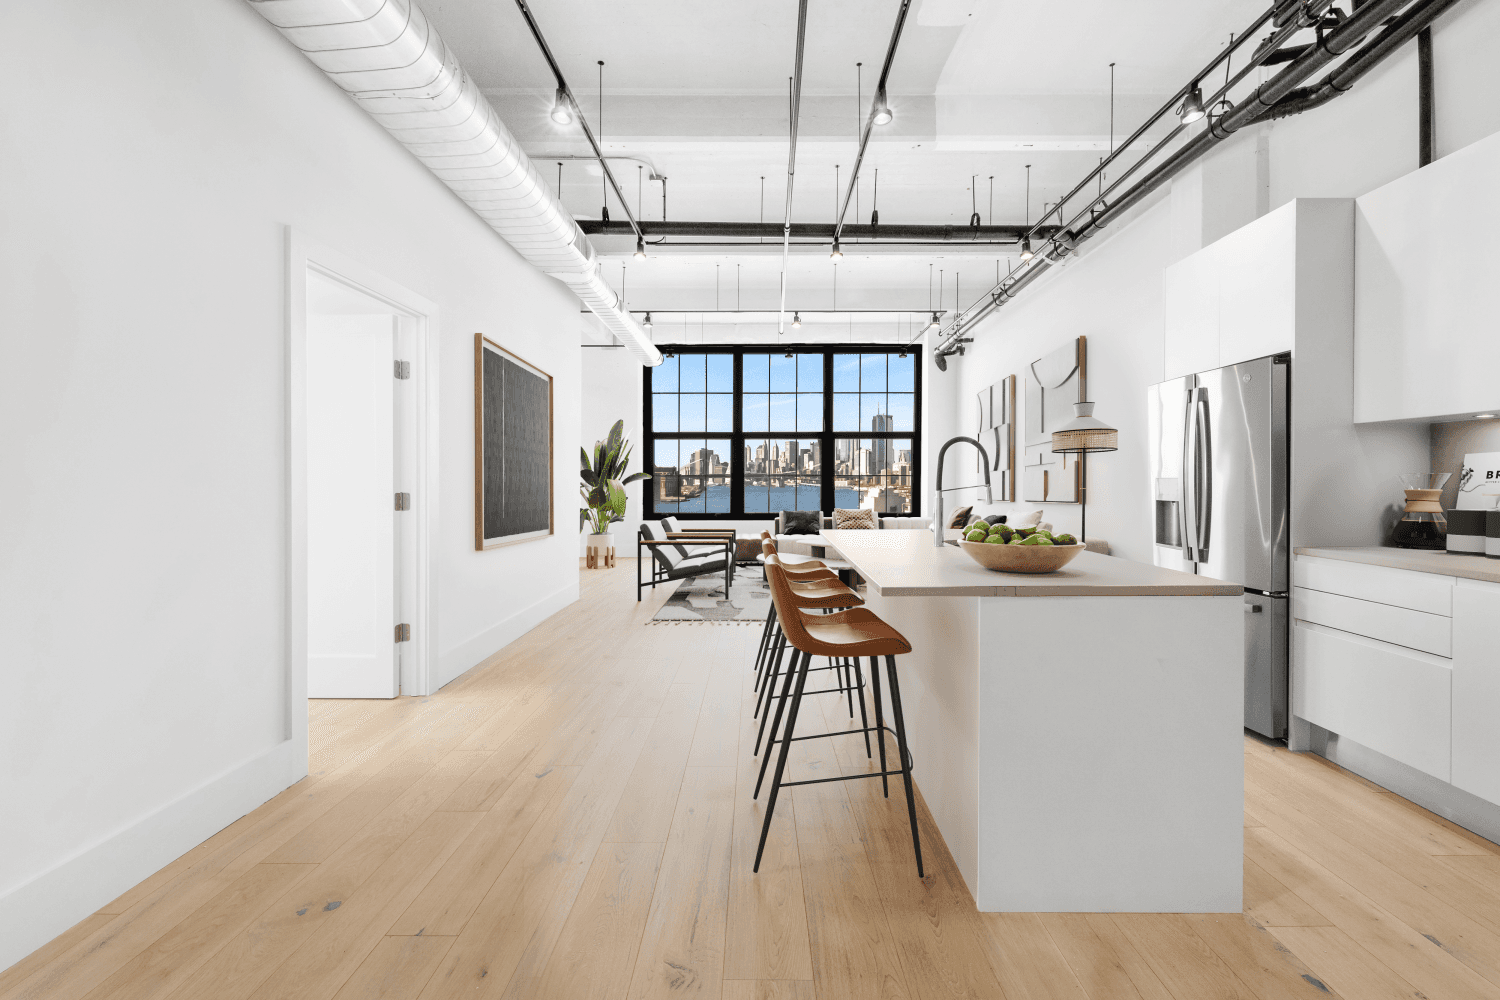 Experience a luxurious rental lifestyle in one of the city's most desirable waterfront neighborhoods in this impeccably crafted 2 bedroom, 2 bathroom South and West facing corner apartment at Williamsburg ...